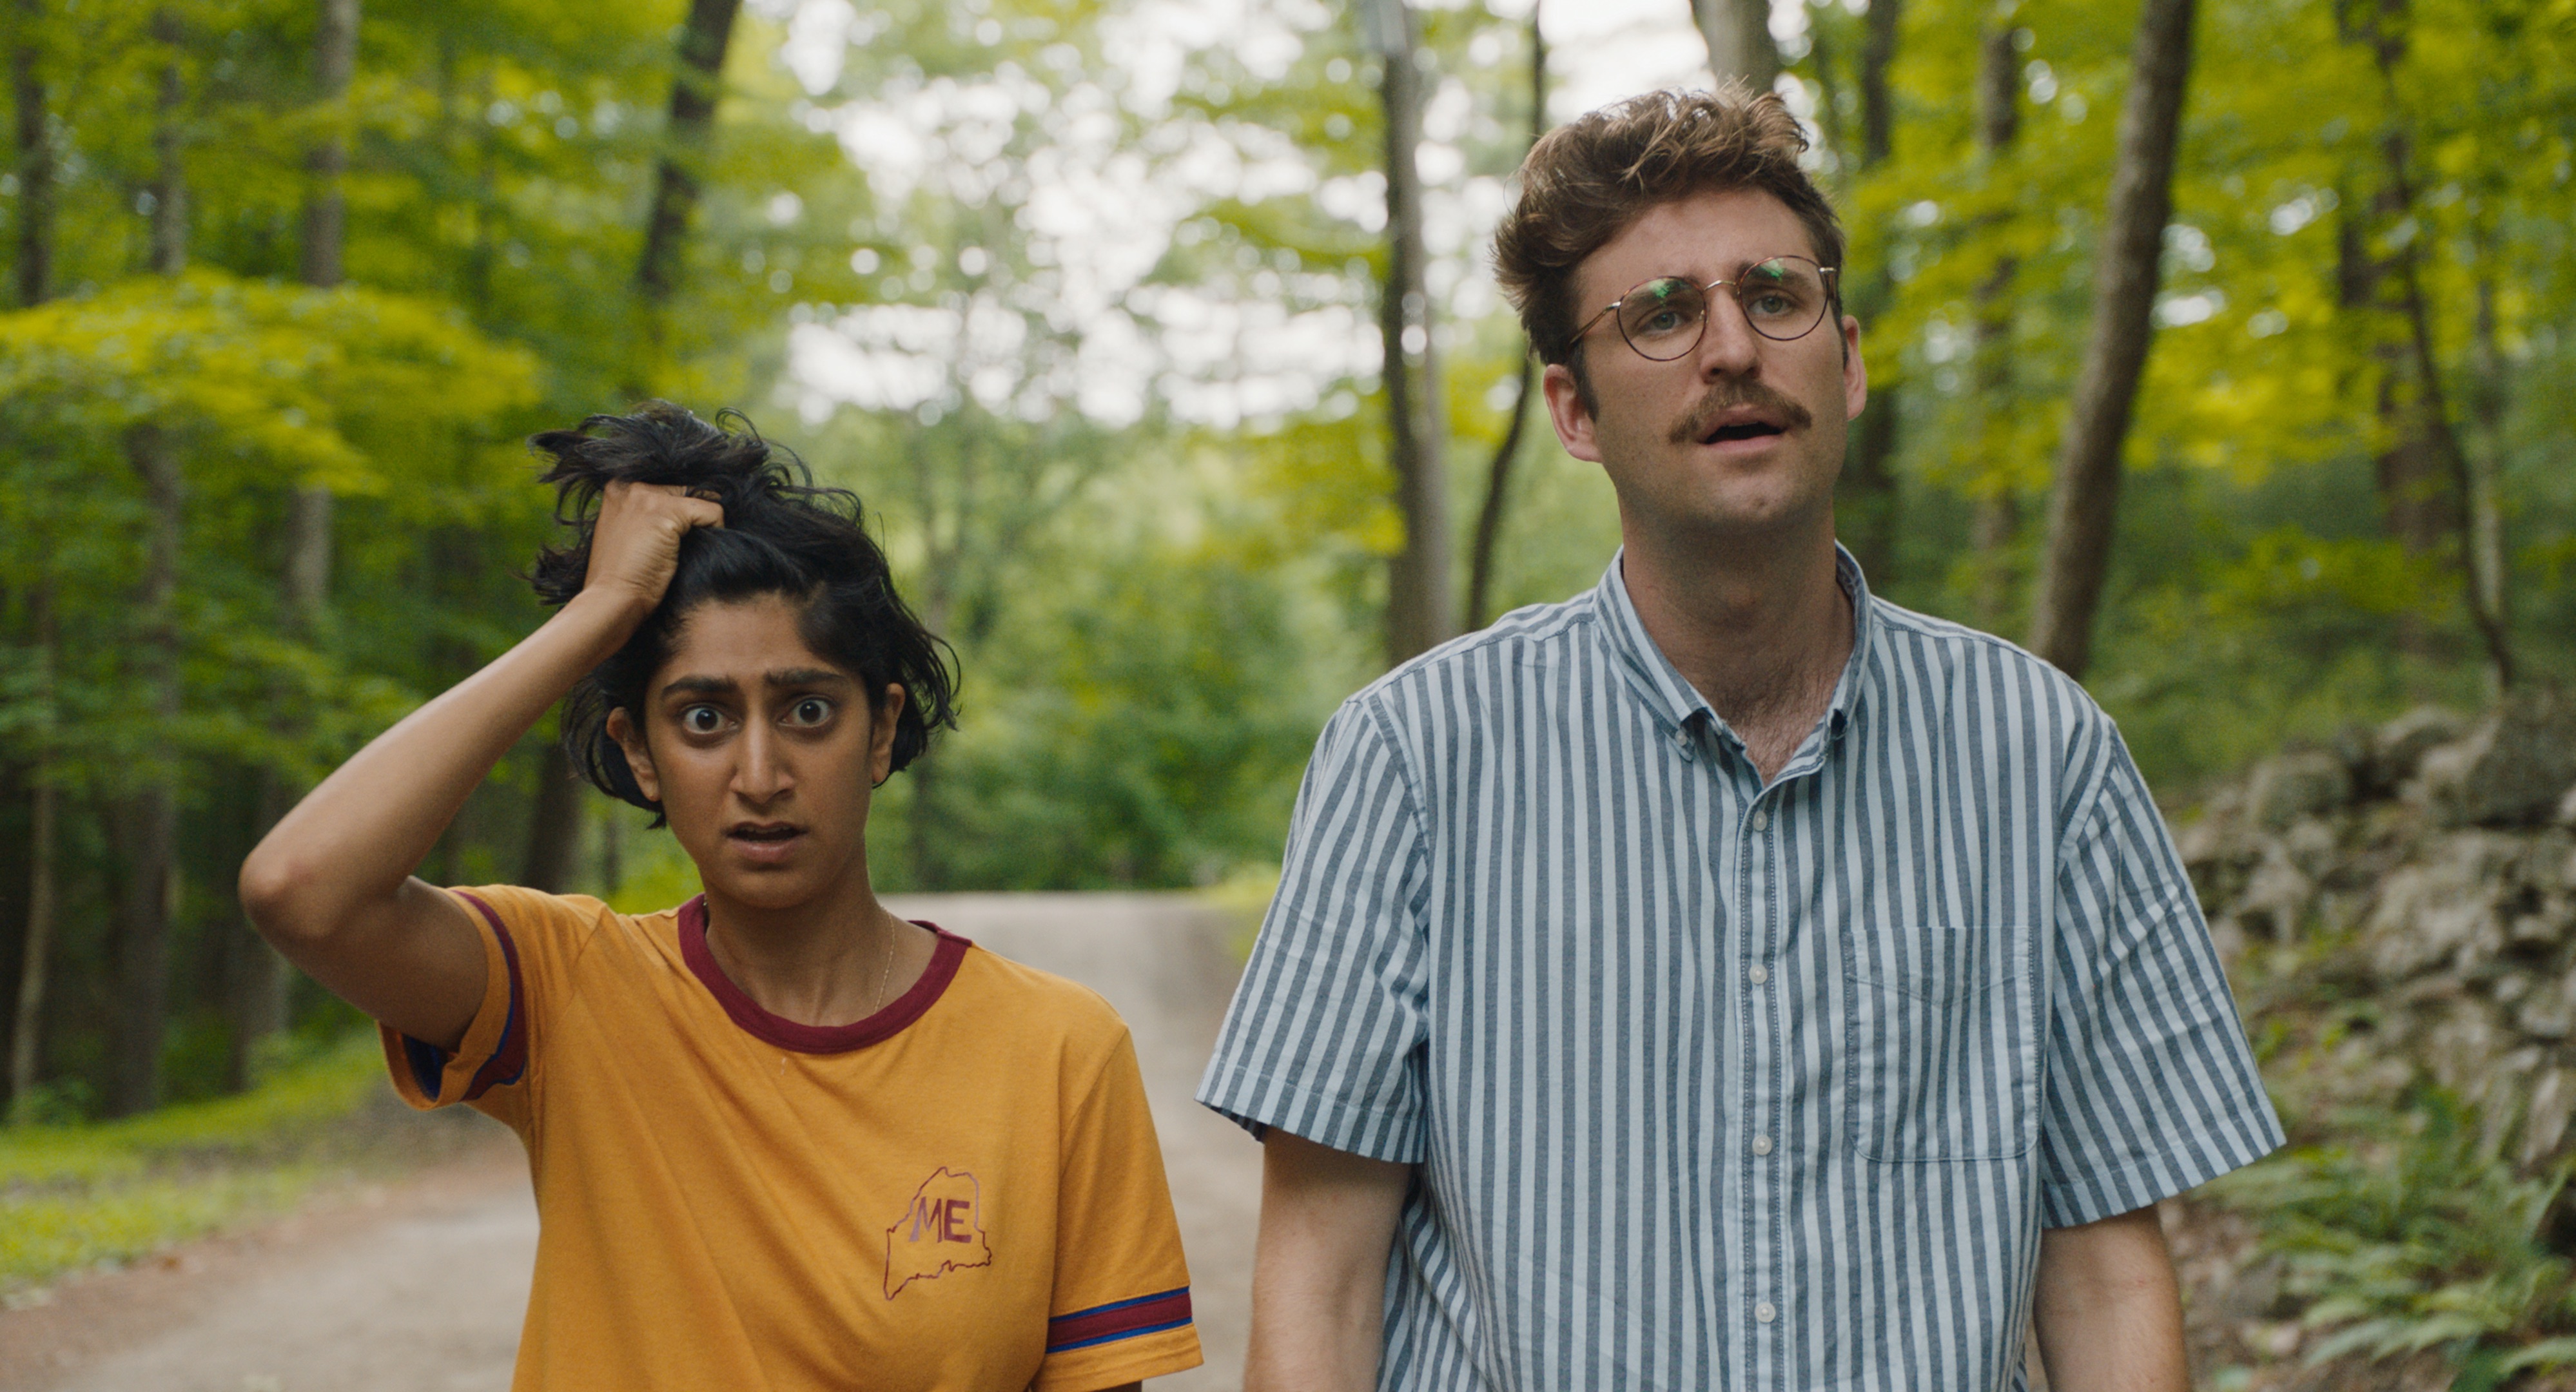 Sunita Mani and John Reynolds in 'Save Yourselves!' (Courtesy of Bleecker Street)